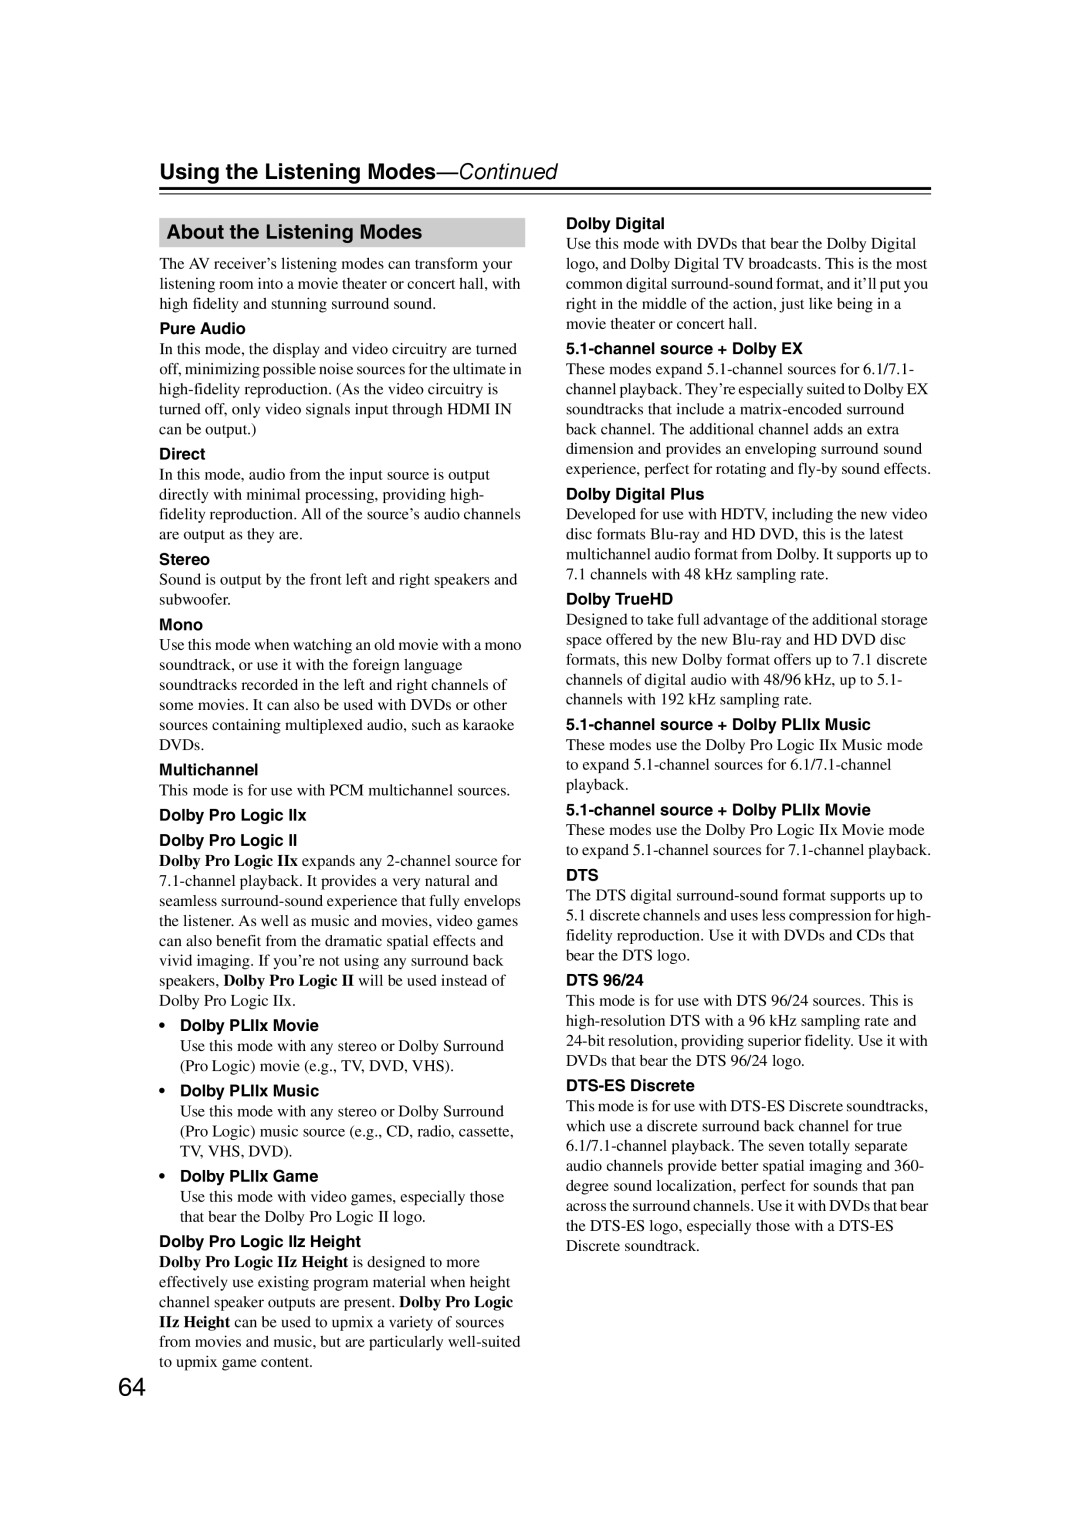 Onkyo TX-SR577, SR507 instruction manual About the Listening Modes, Using the Listening Modes—Continued 